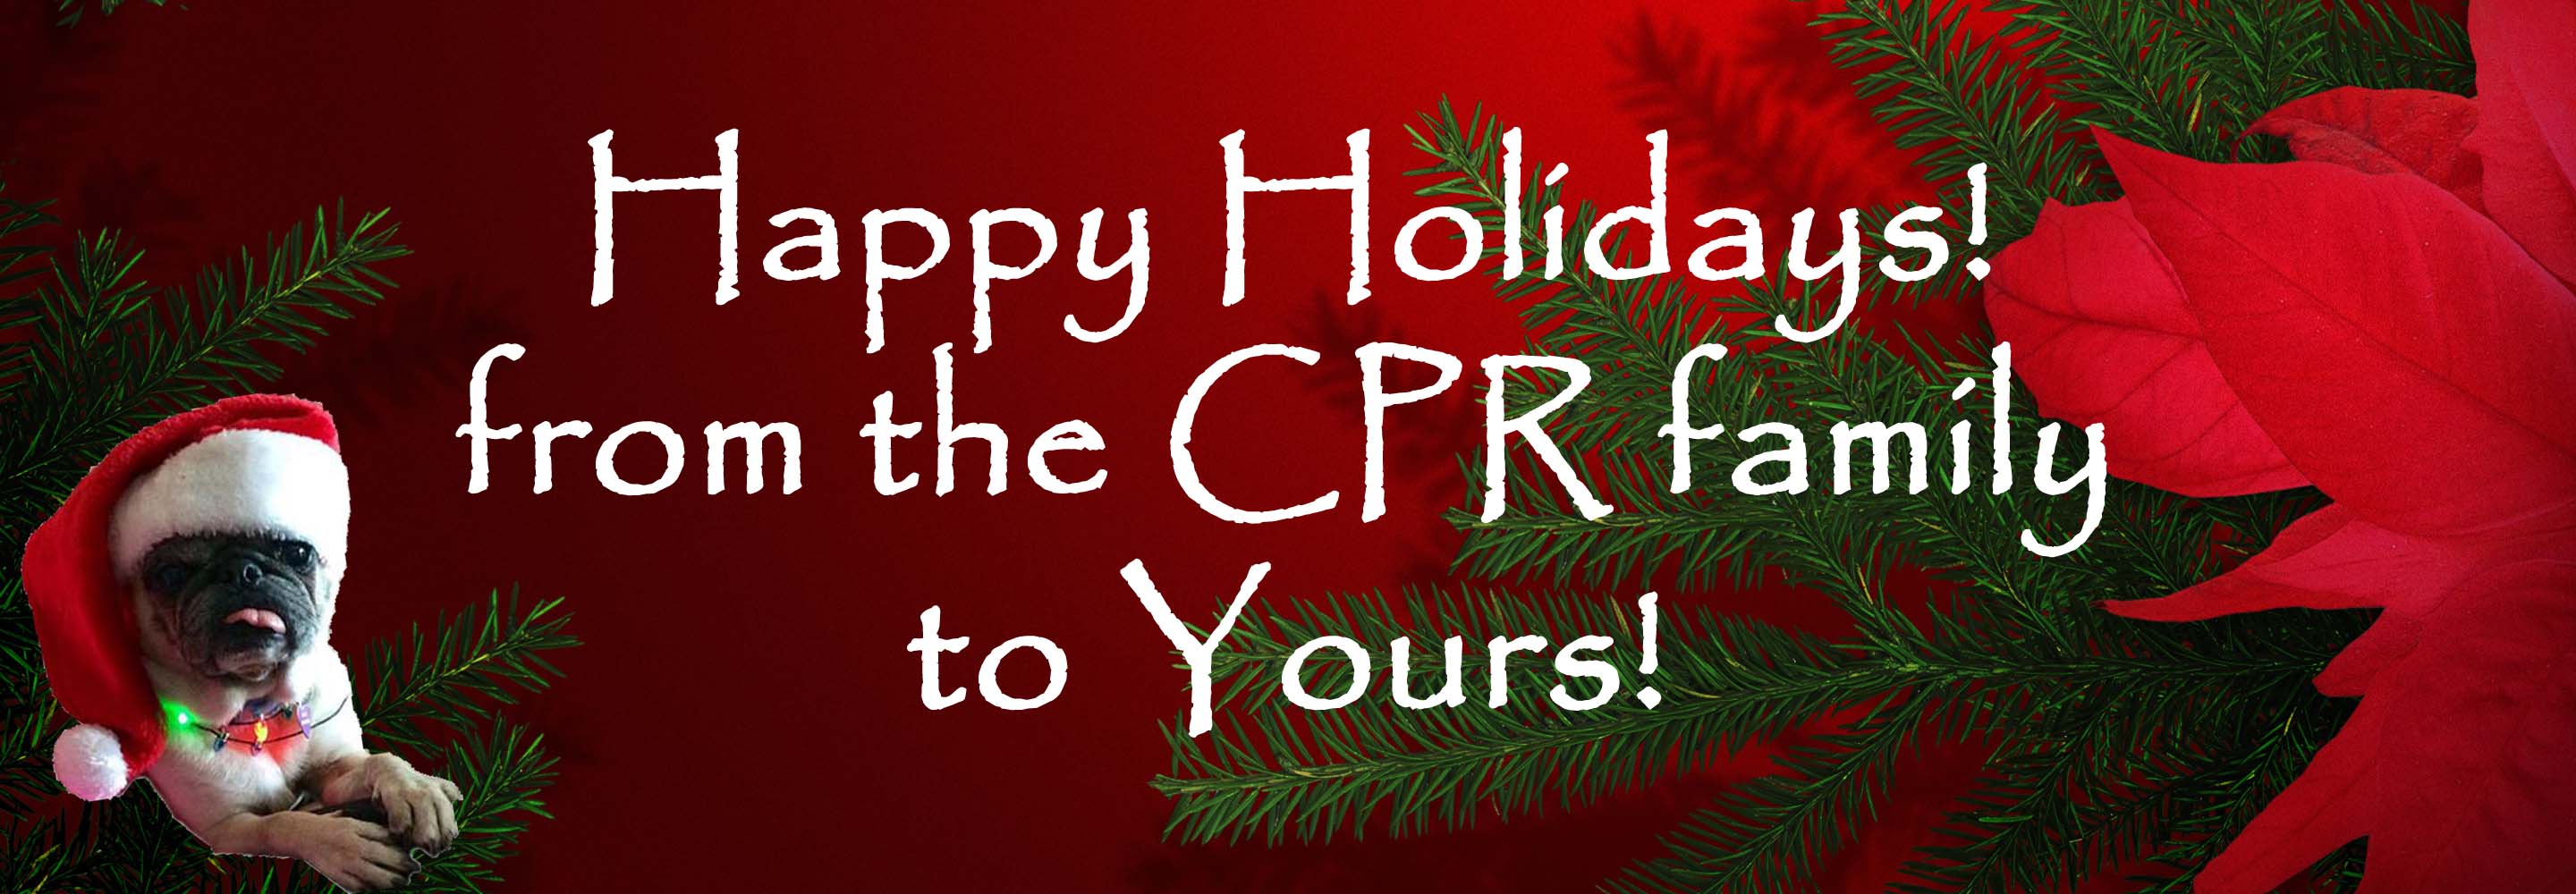 Happy Holidays! From the CPR Family to Yours!